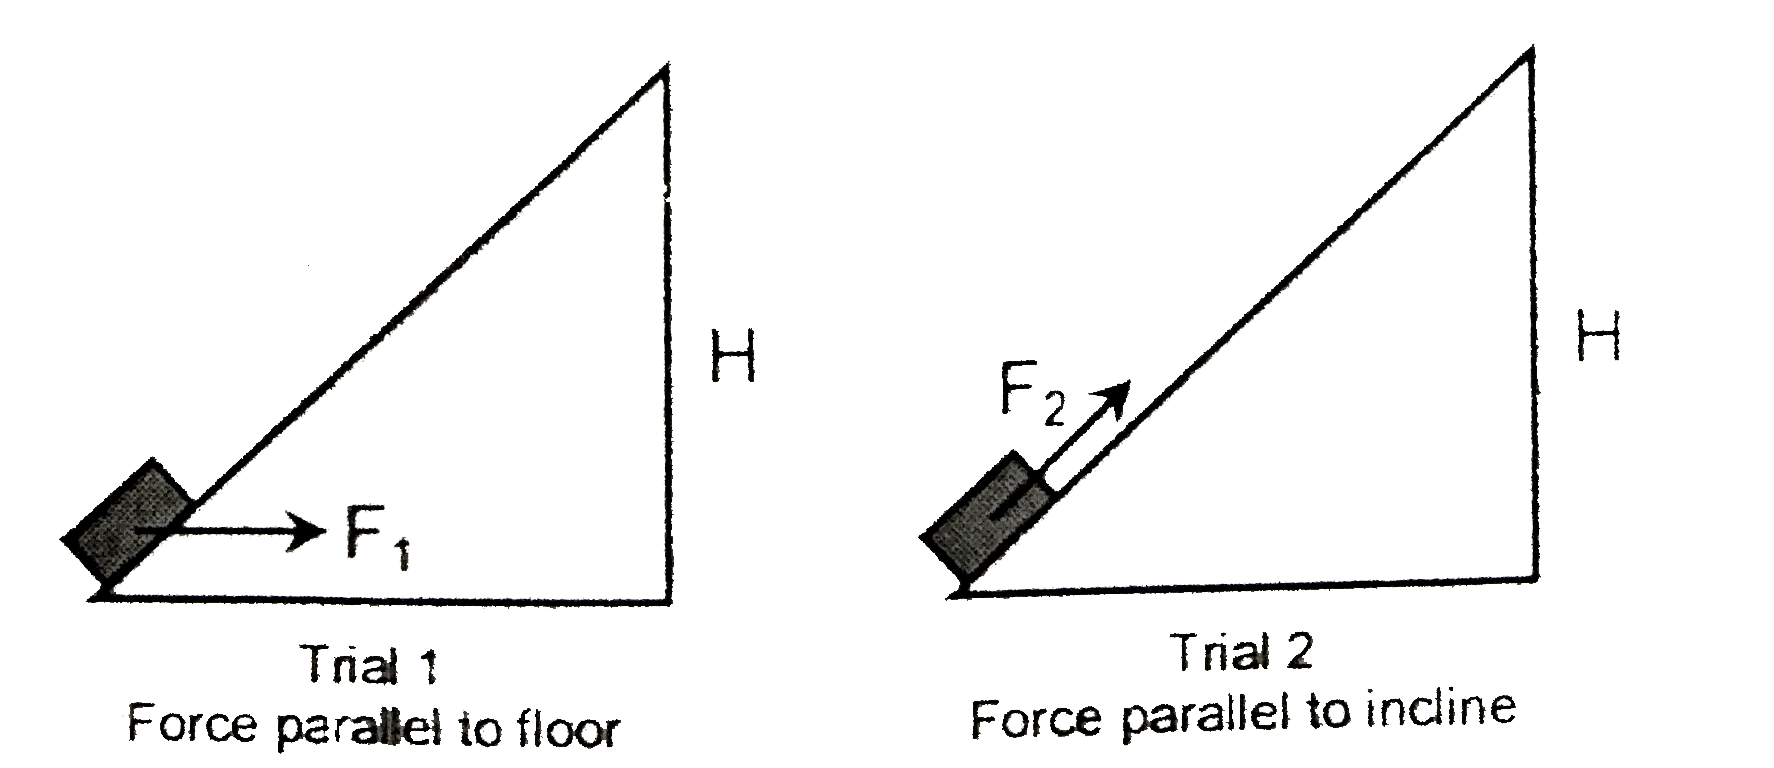 An object of mass M starts from rest at the bottom of a fixed incline of height H. A person decides to push the object up the incline in one of two ways with an applied force shown in the diagram. In each of the trials, the object reaches the top of the incline with speed V. How would the work done by the person on the block compare for the two trials? Assume the same constant non-zero coefficient of kinetic friction between the incline and the object for both trials.